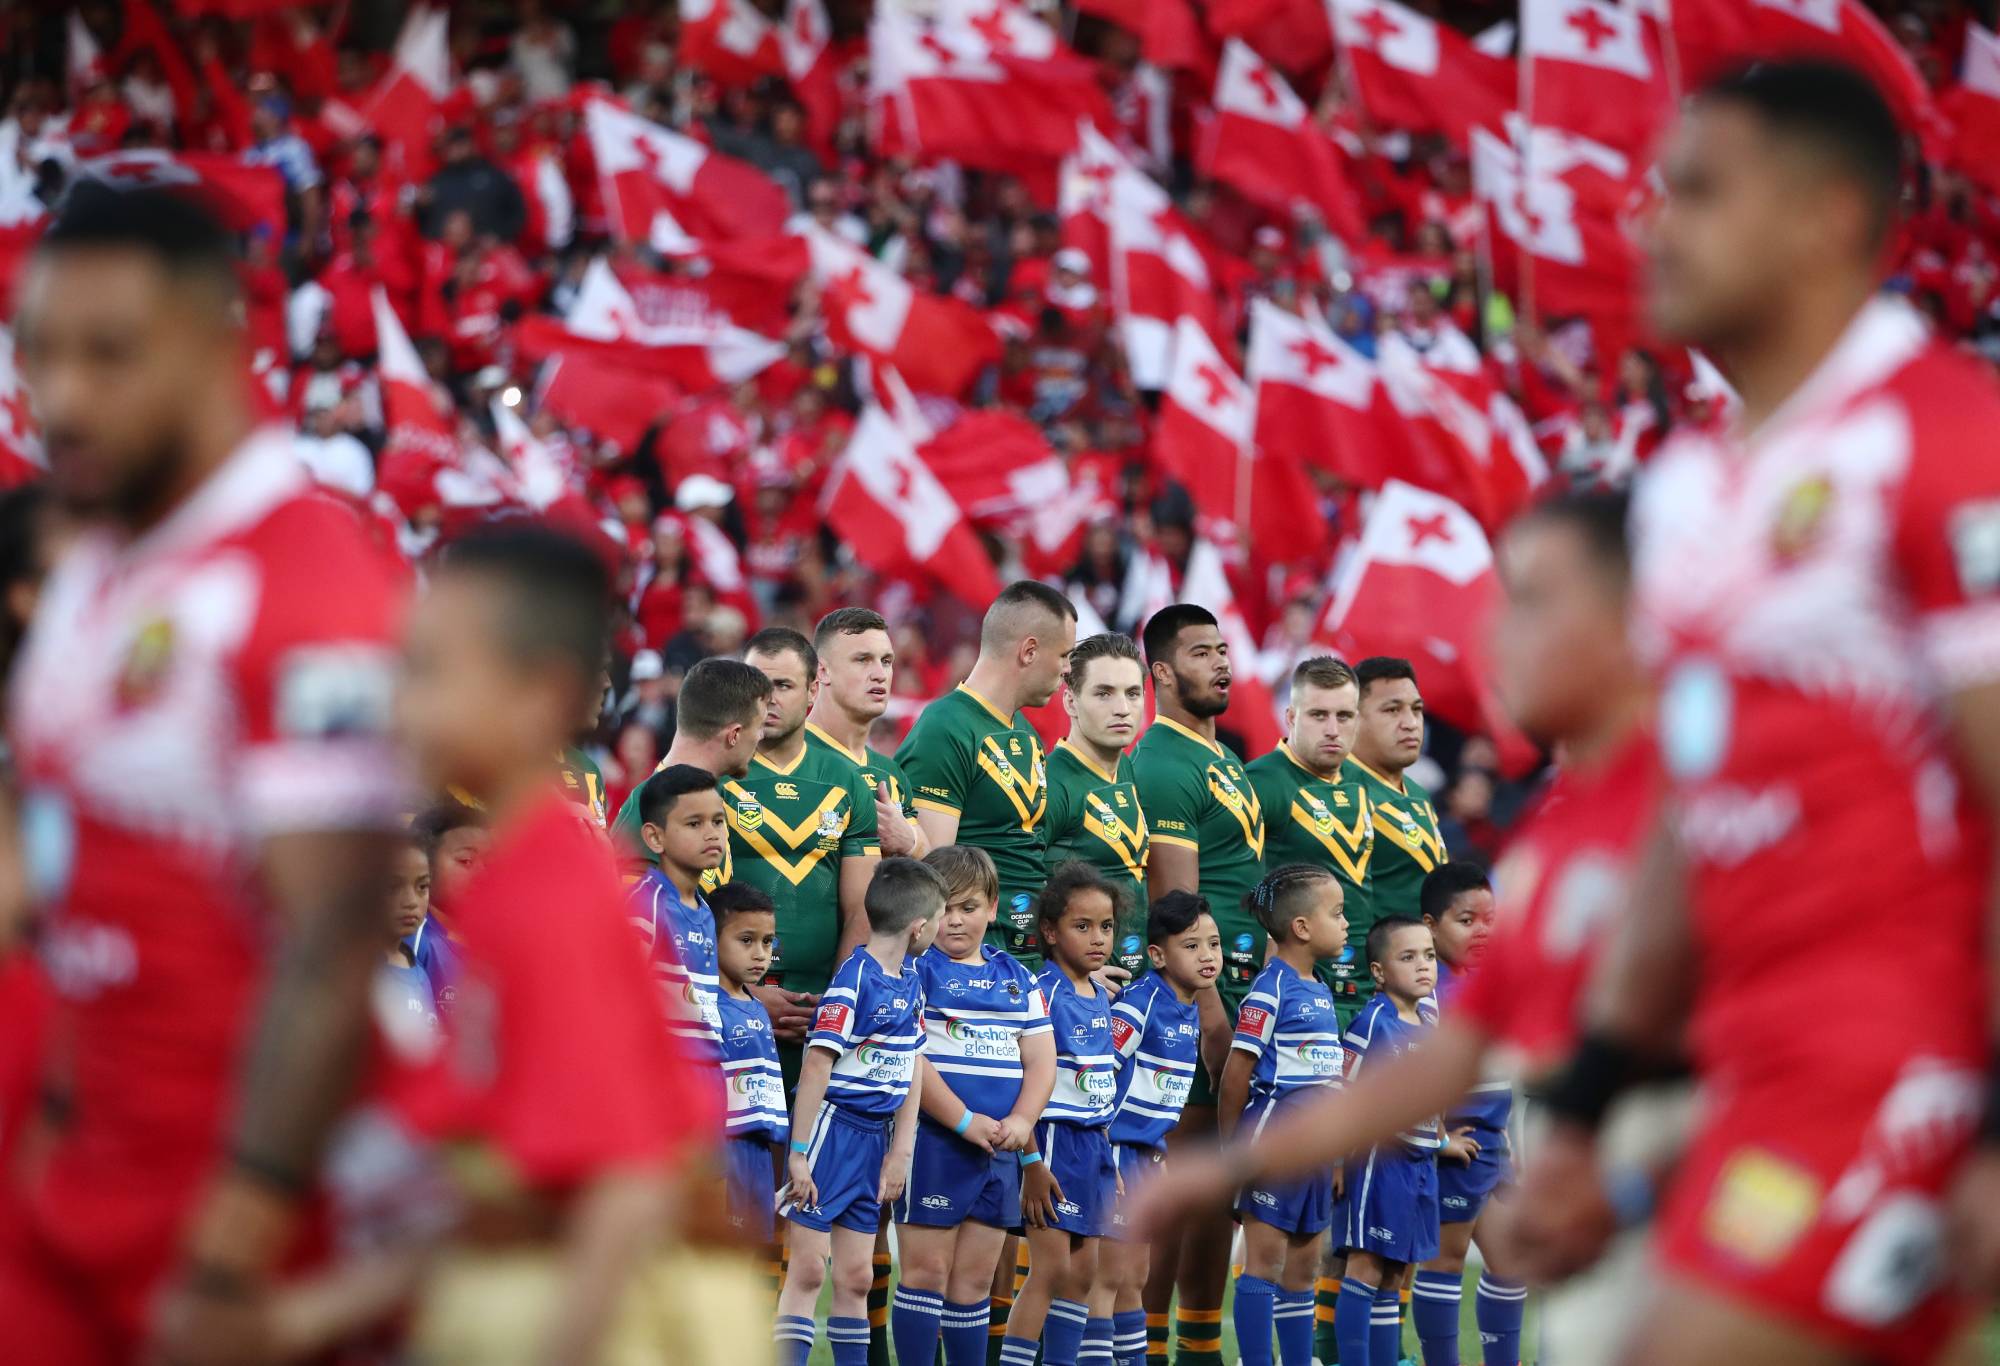 AUCKLAND, NEW ZEALAND - NOVEMBER 02: The Kangaroos line up for the national anthems during the Rugby League International Test match between the Australia Kangaroos and Tonga at Eden Park on November 02, 2019 in Auckland, New Zealand. (Photo by Fiona Goodall/Getty Images)